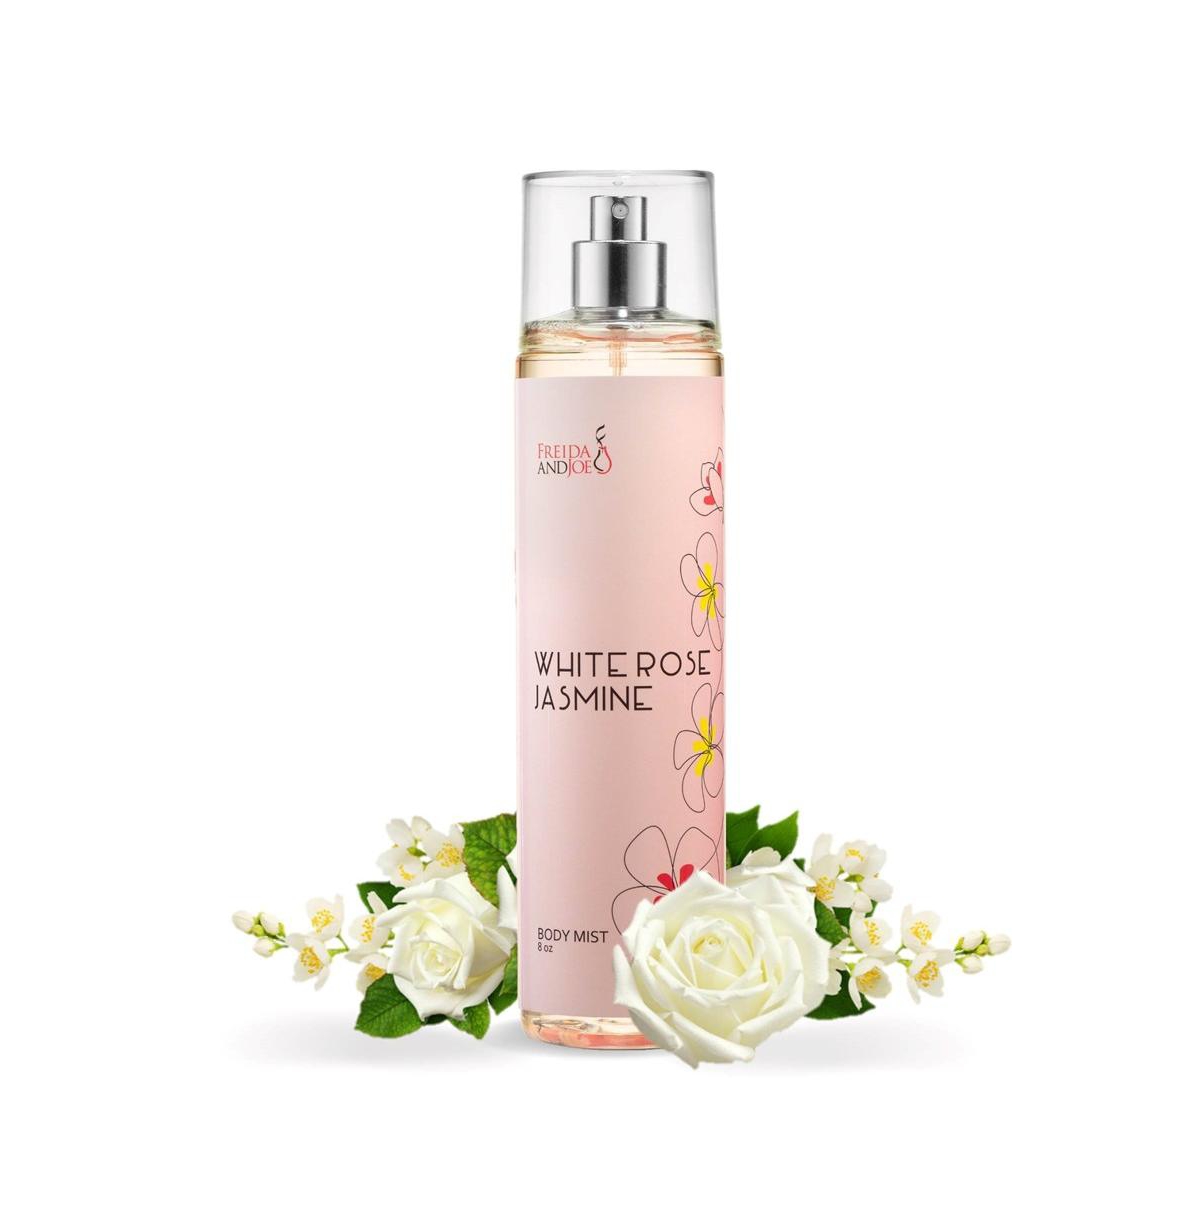 White Rose Jasmine Fine Fragrance Body Mist in 8oz Spray Bottle Luxury Body Care Mothers Day Gifts for Mom - Pink